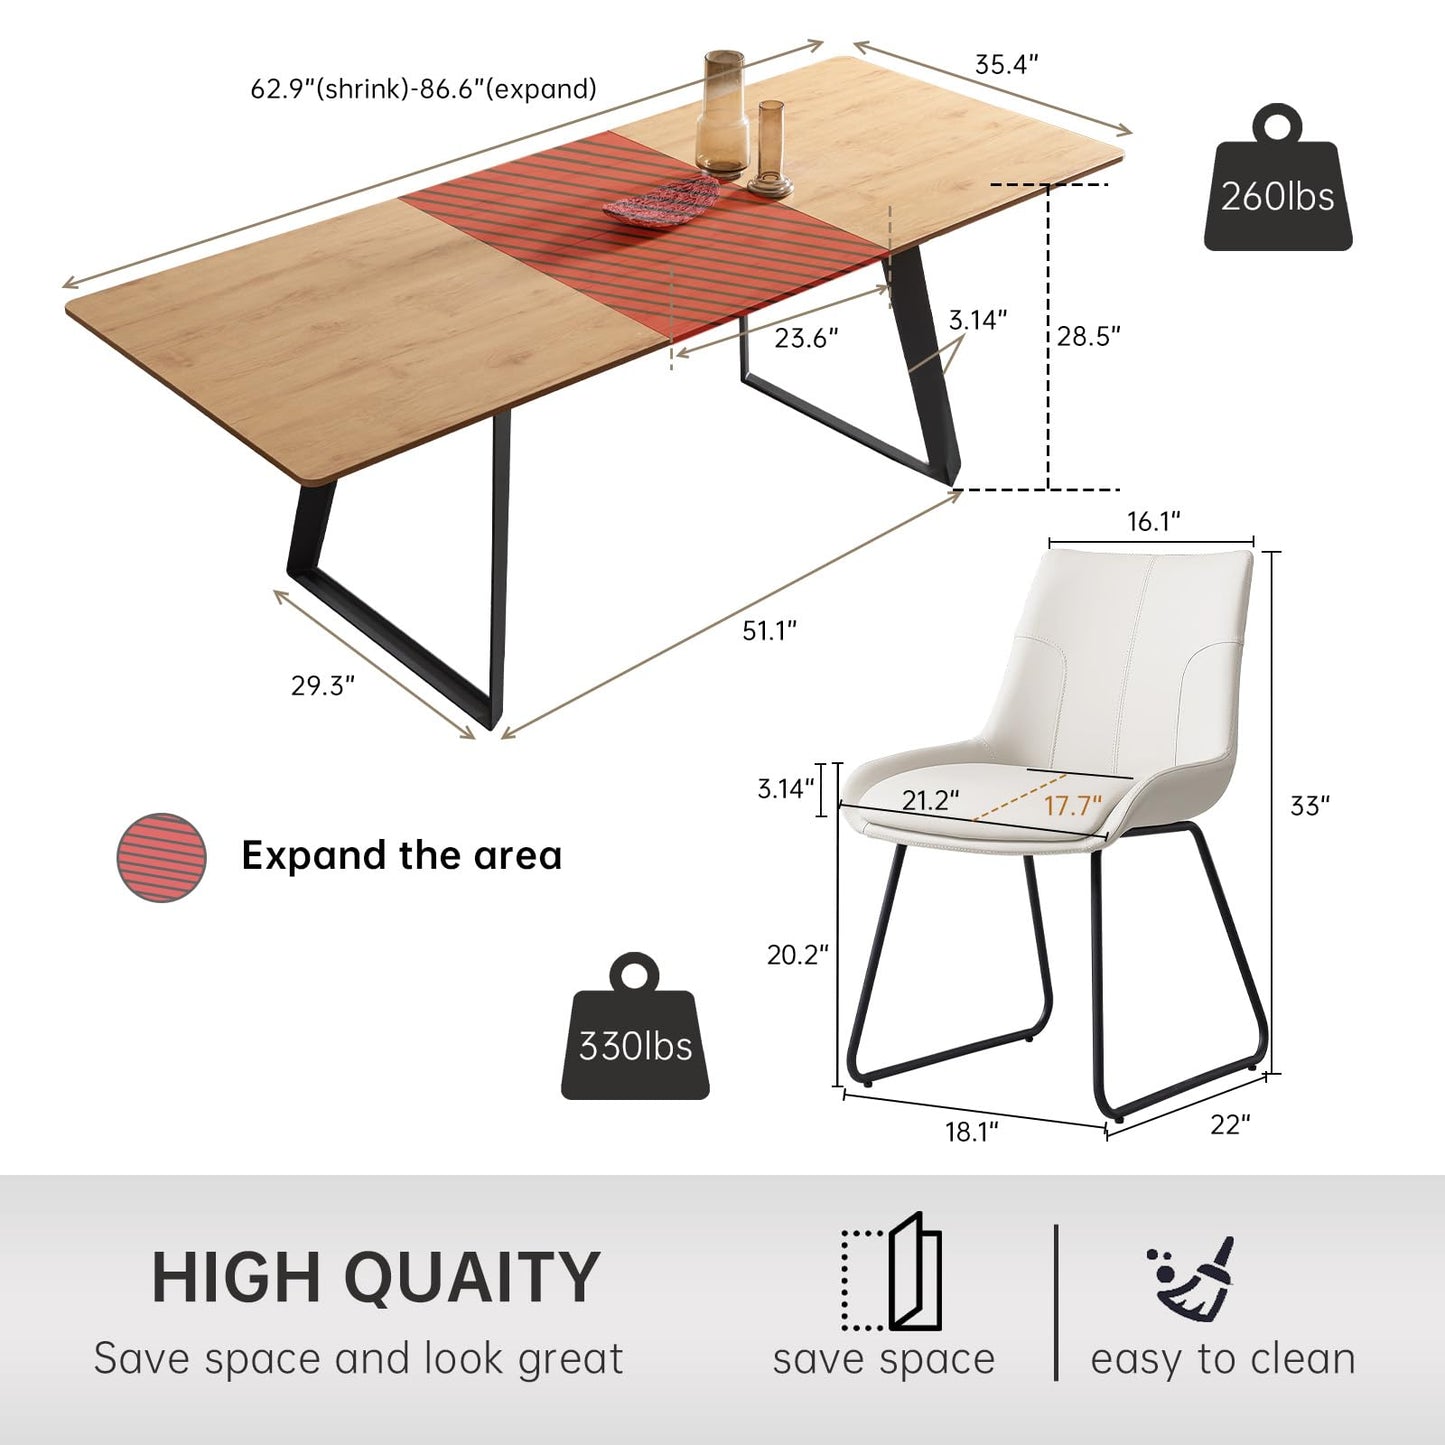 ZckyCine Modern Medieval Dining Table Set Dining Table and Chairs 6 People Rectangular Wooden Expansion Dining Table Space-Saving Multifunctional Dining Table